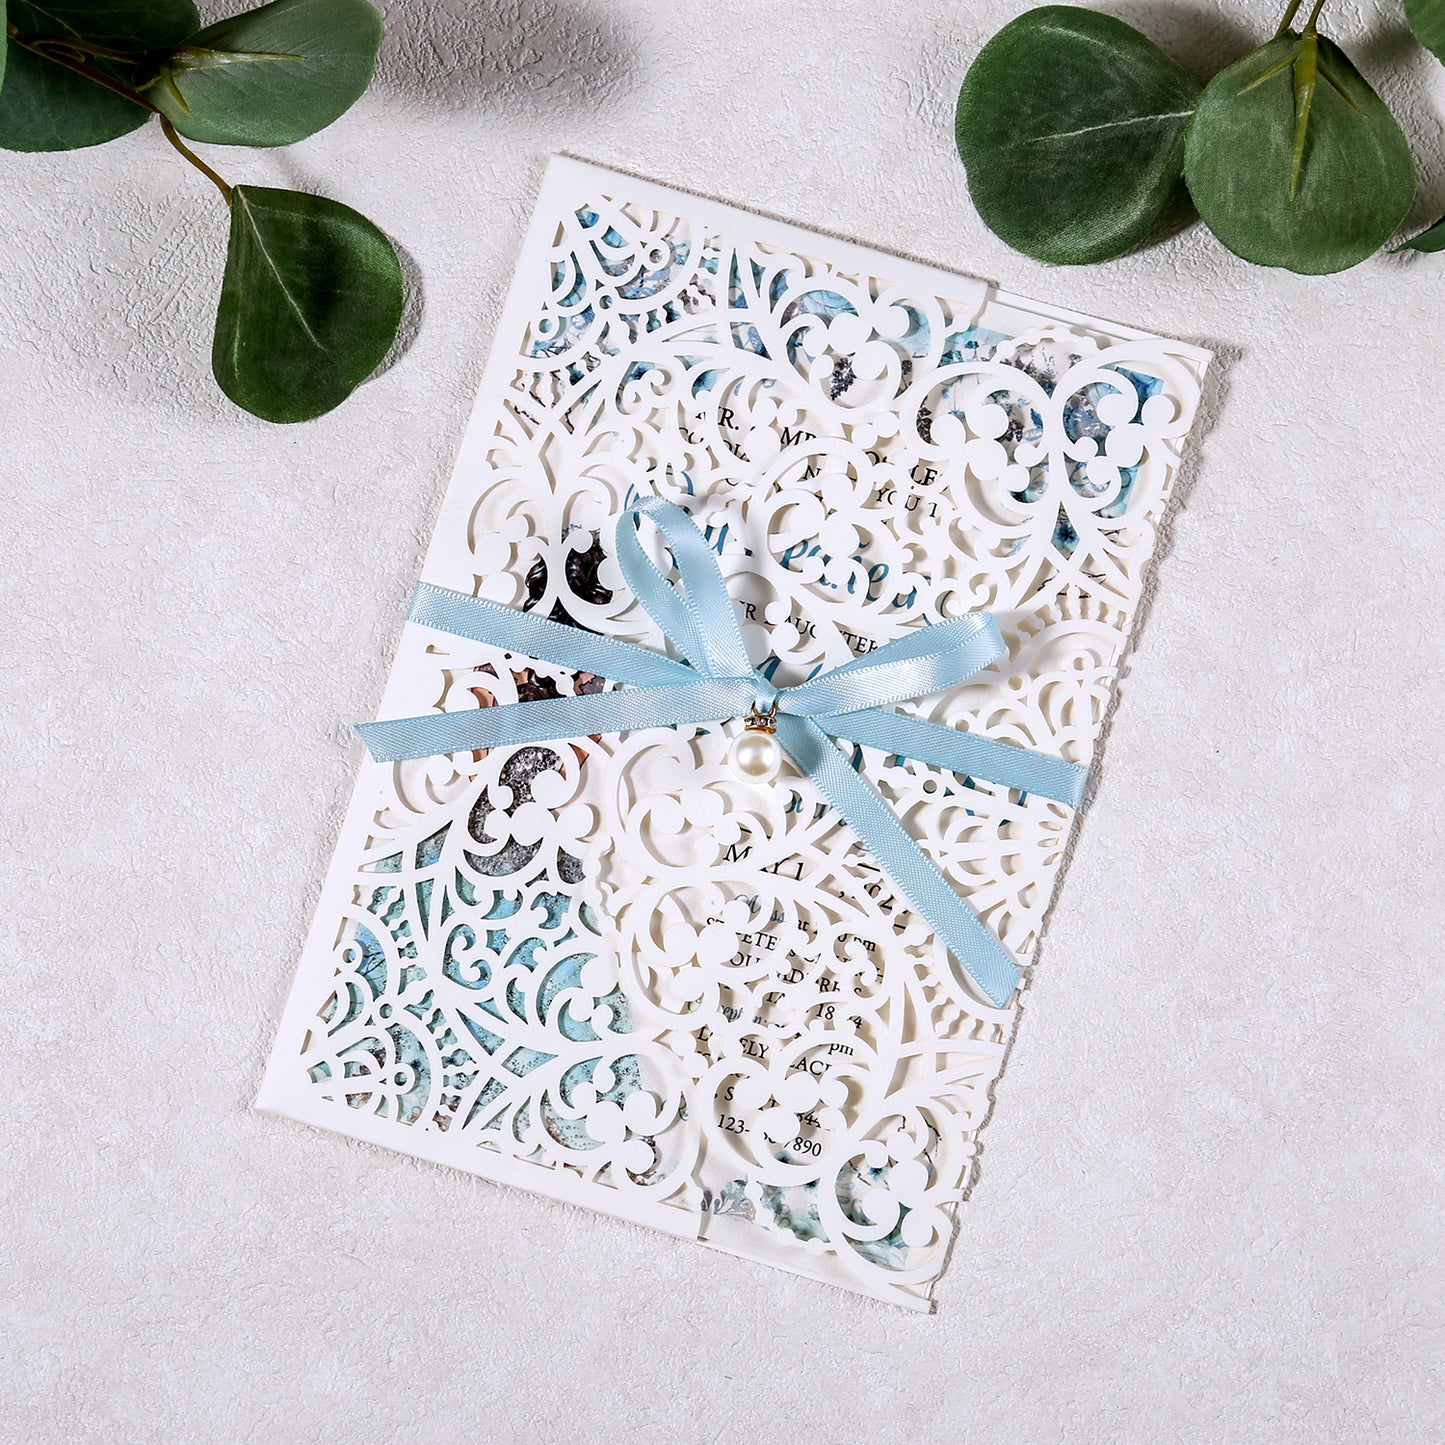 5 X 7.2" Laser Cut Hollow Rose Wedding invitations Cards With Blue Ribbon And Envelopes For Quinceanera Sweet 15 Invite - DorisHome